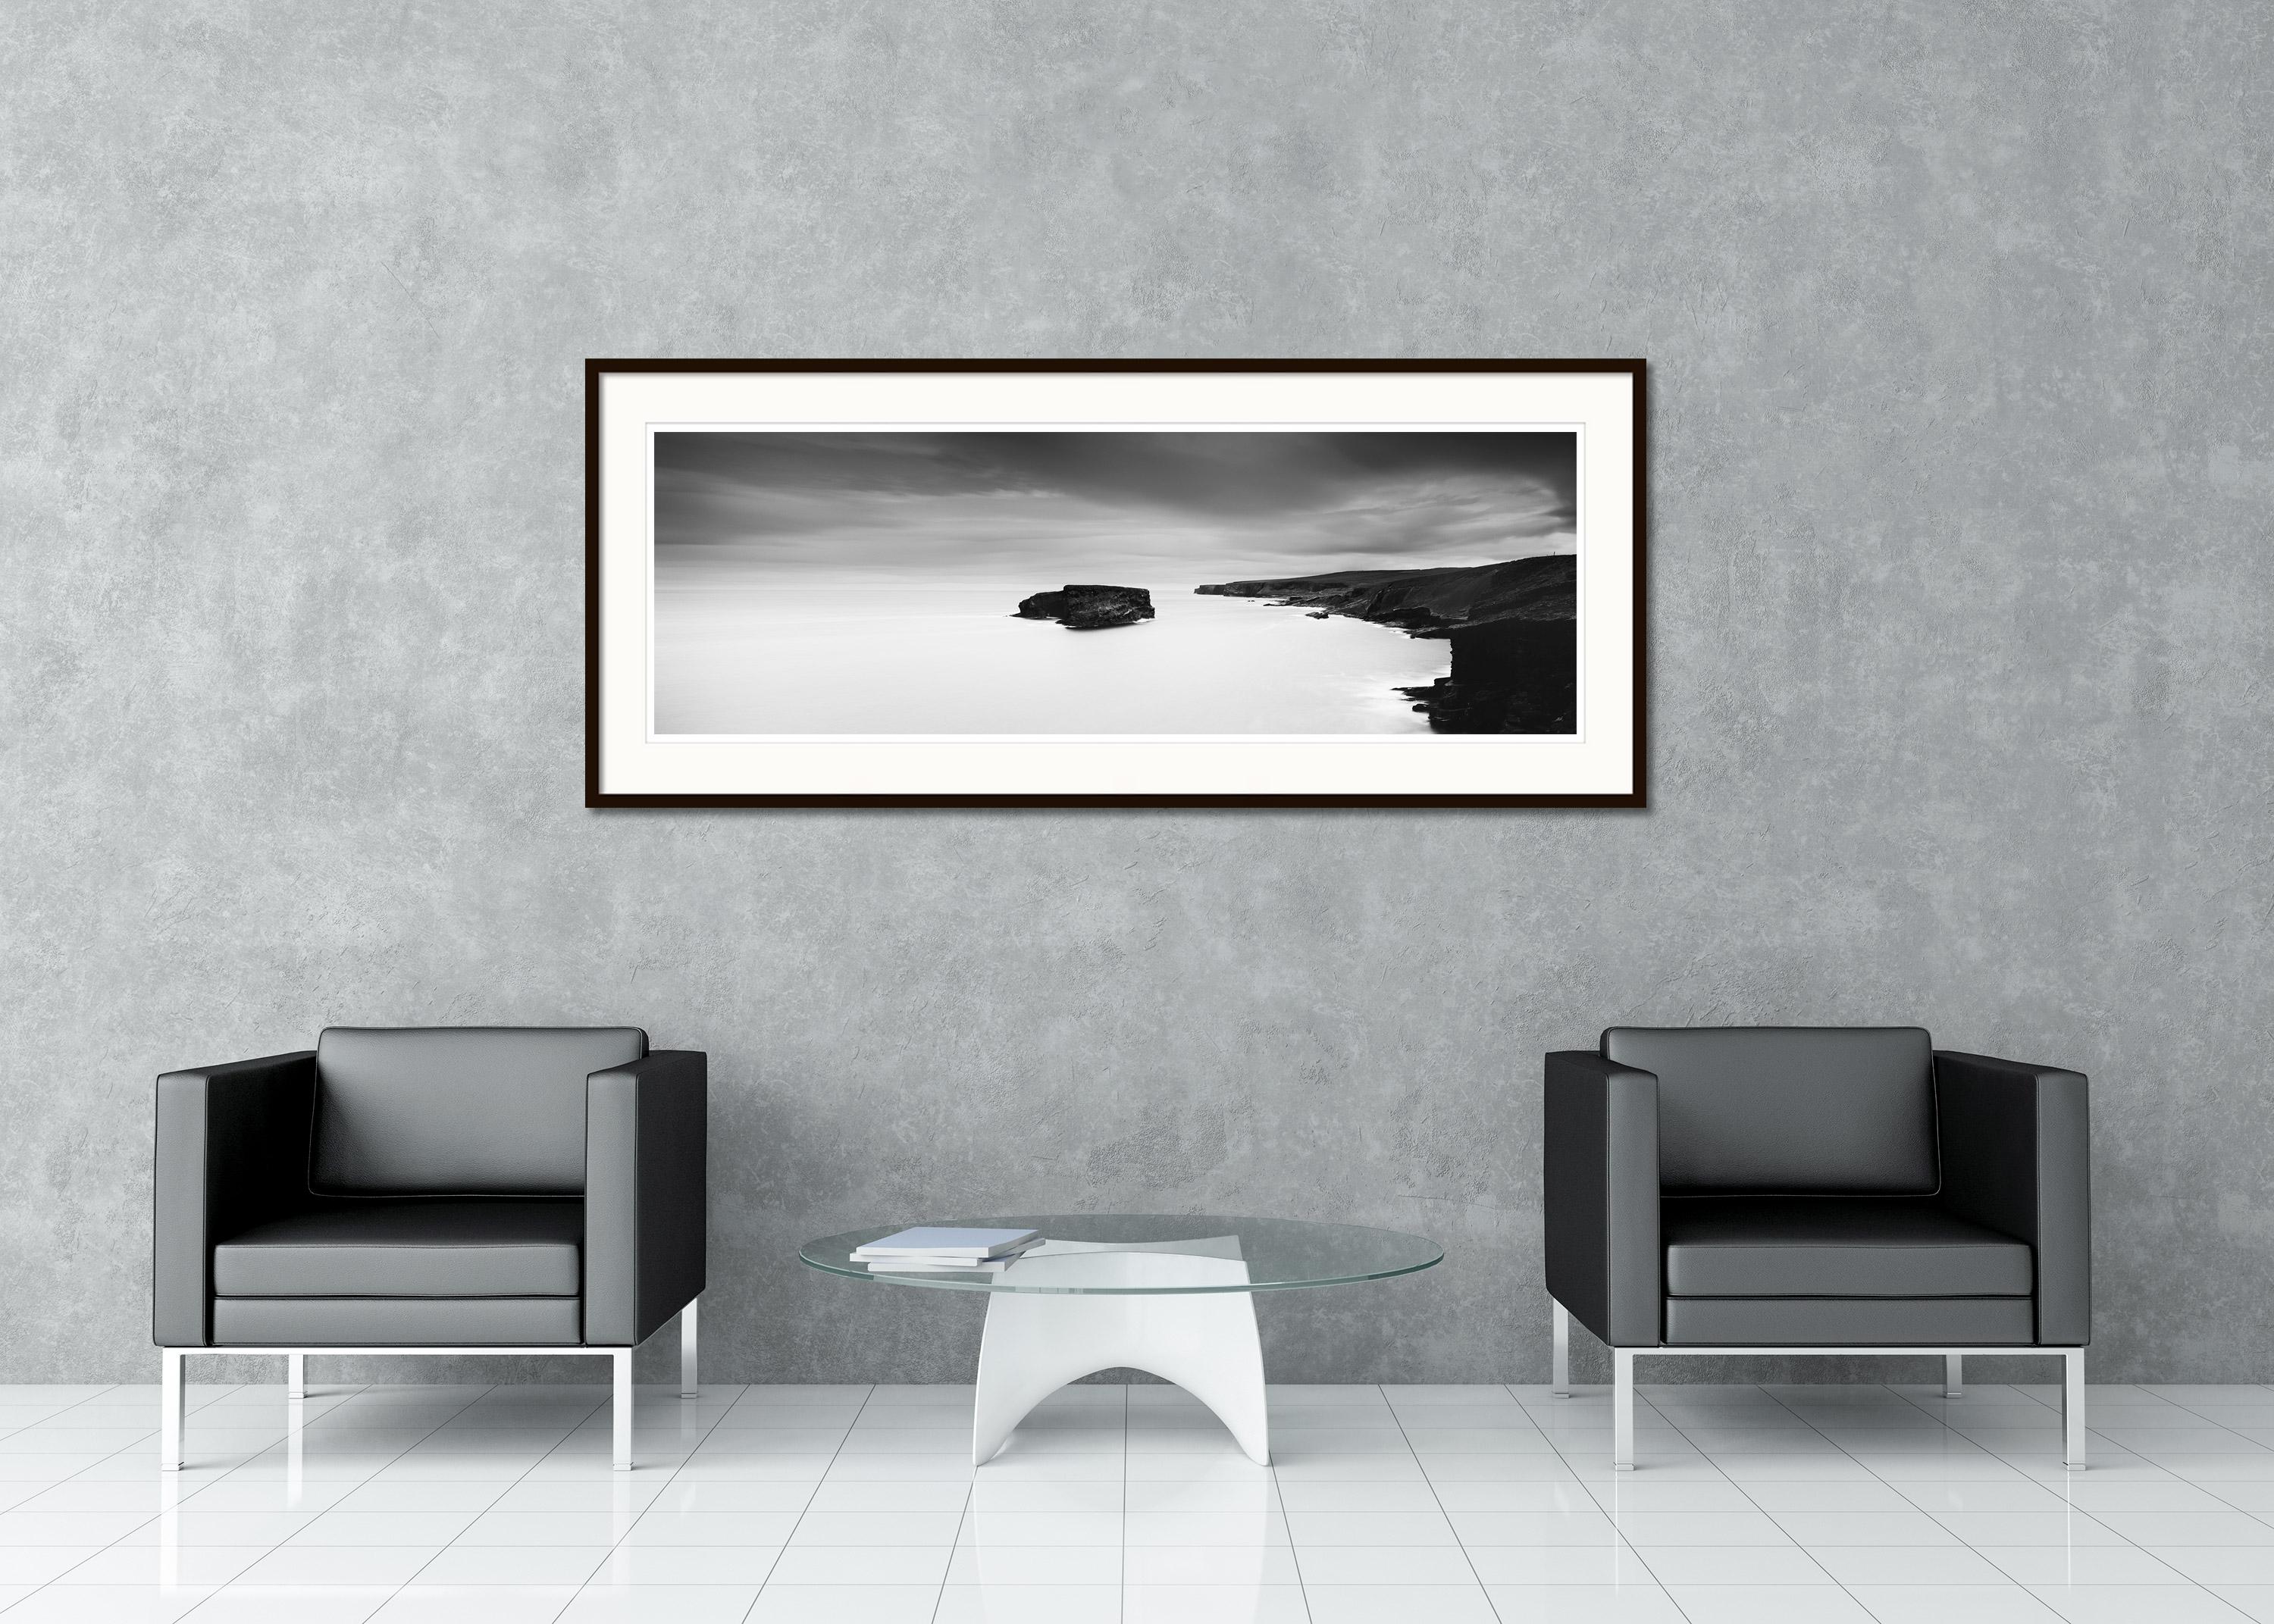 Black and white fine art waterscape - landscape photography. Panorama of the Irish coast with the steep cliffs and an island. Archival pigment ink print, edition of 9. Signed, titled, dated and numbered by artist. Certificate of authenticity